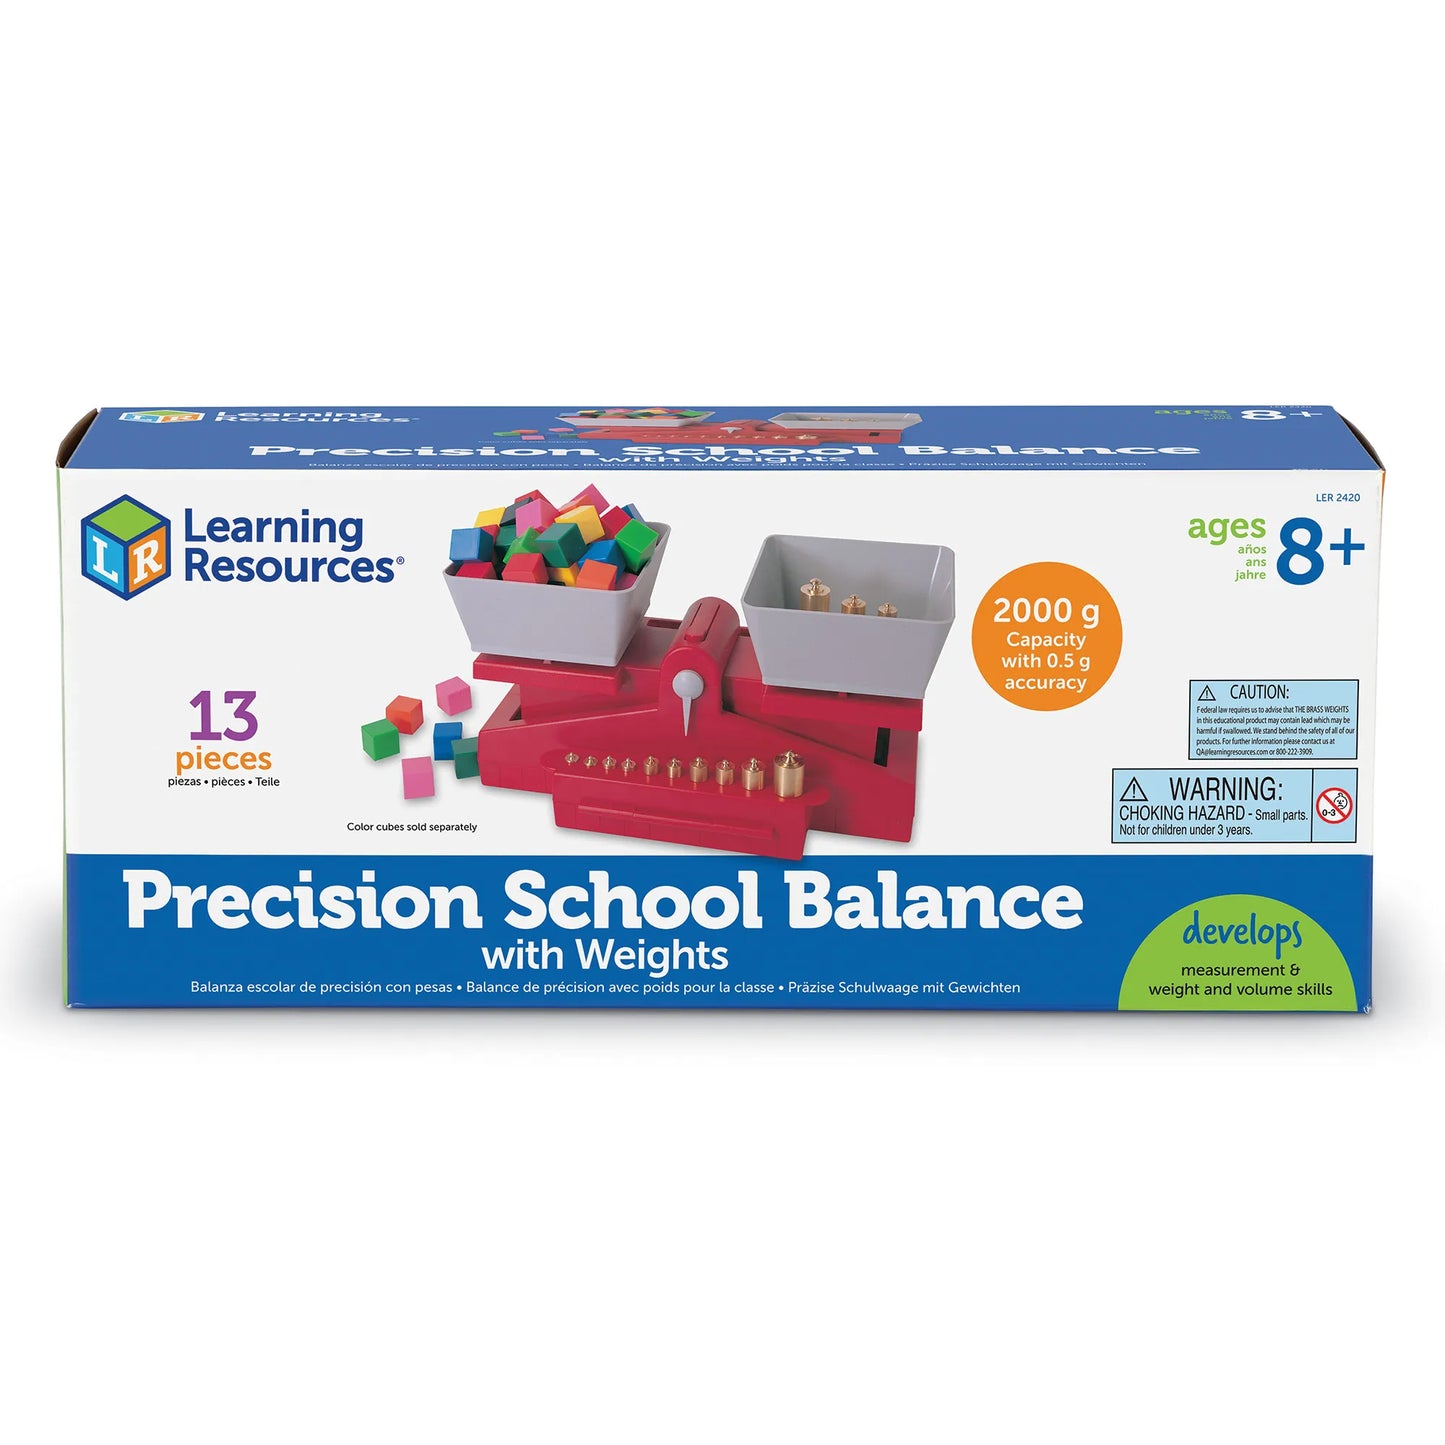 Learning Resources Precision School Balance with Weights